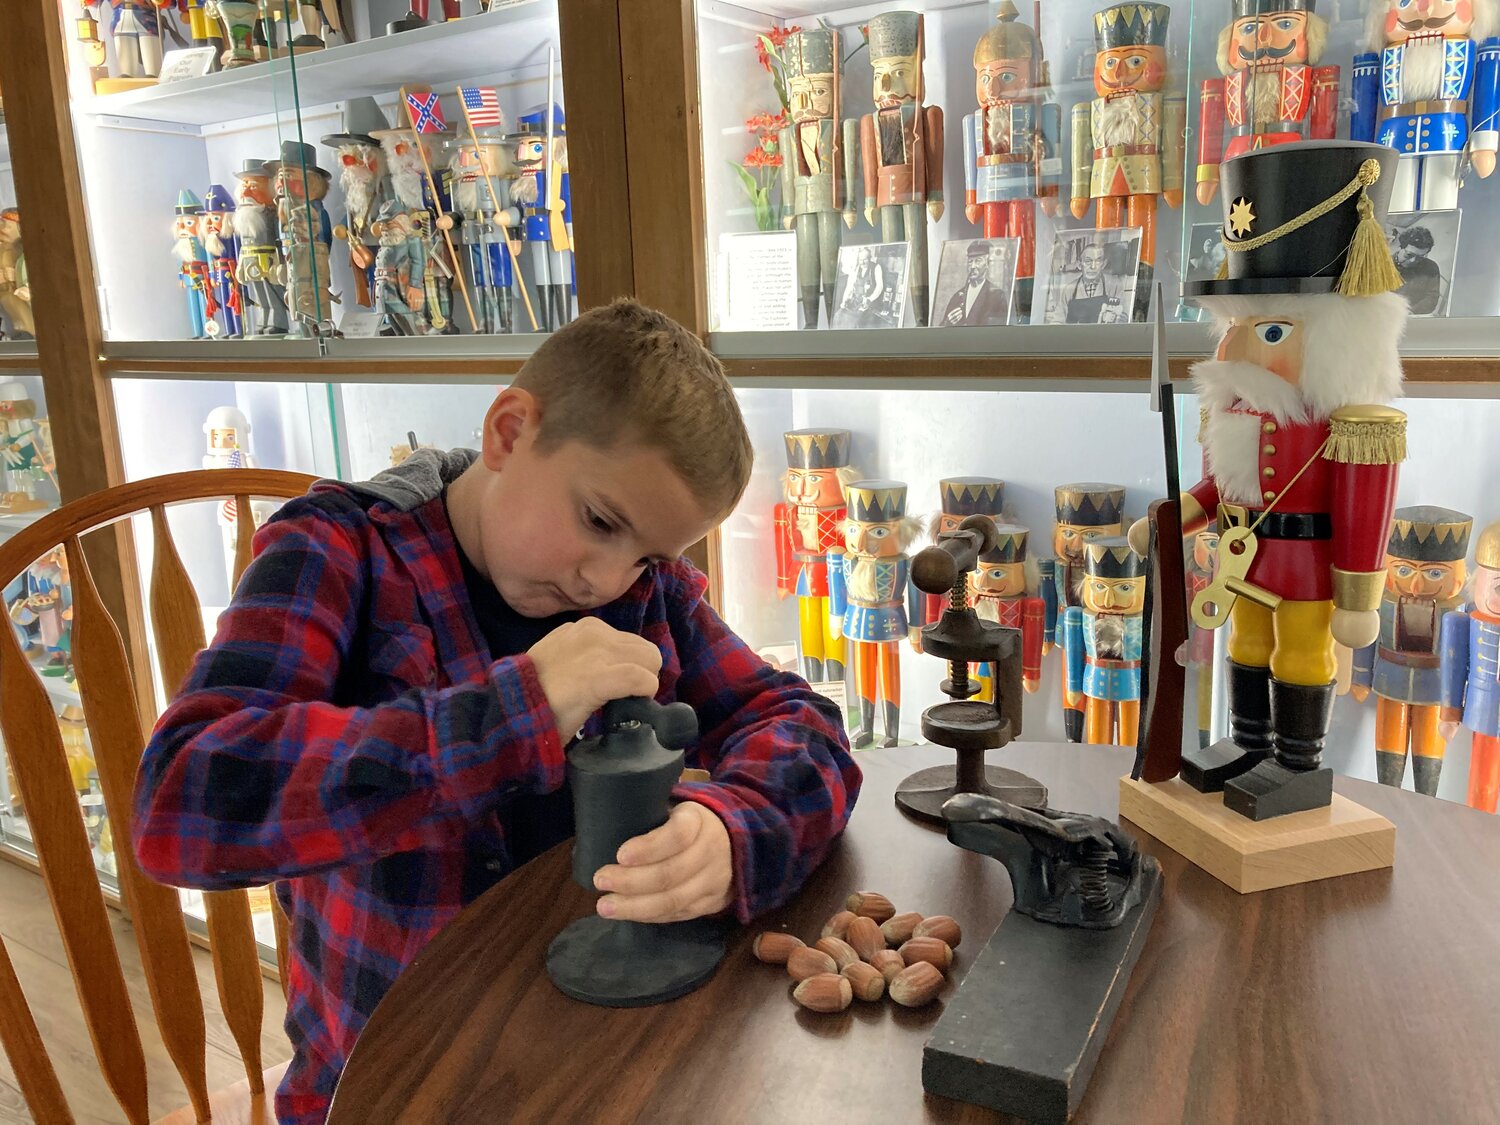 Six-year-old Easton Harper of Marysville enjoys checking out the newest and oldest nutcracker tools every time he comes to visit his grandma in Leavenworth. Easton is fascinated with tools and has a very technical mind already at his young age. He was a joy for visitors to watch.
Photo by Barbara Washburn